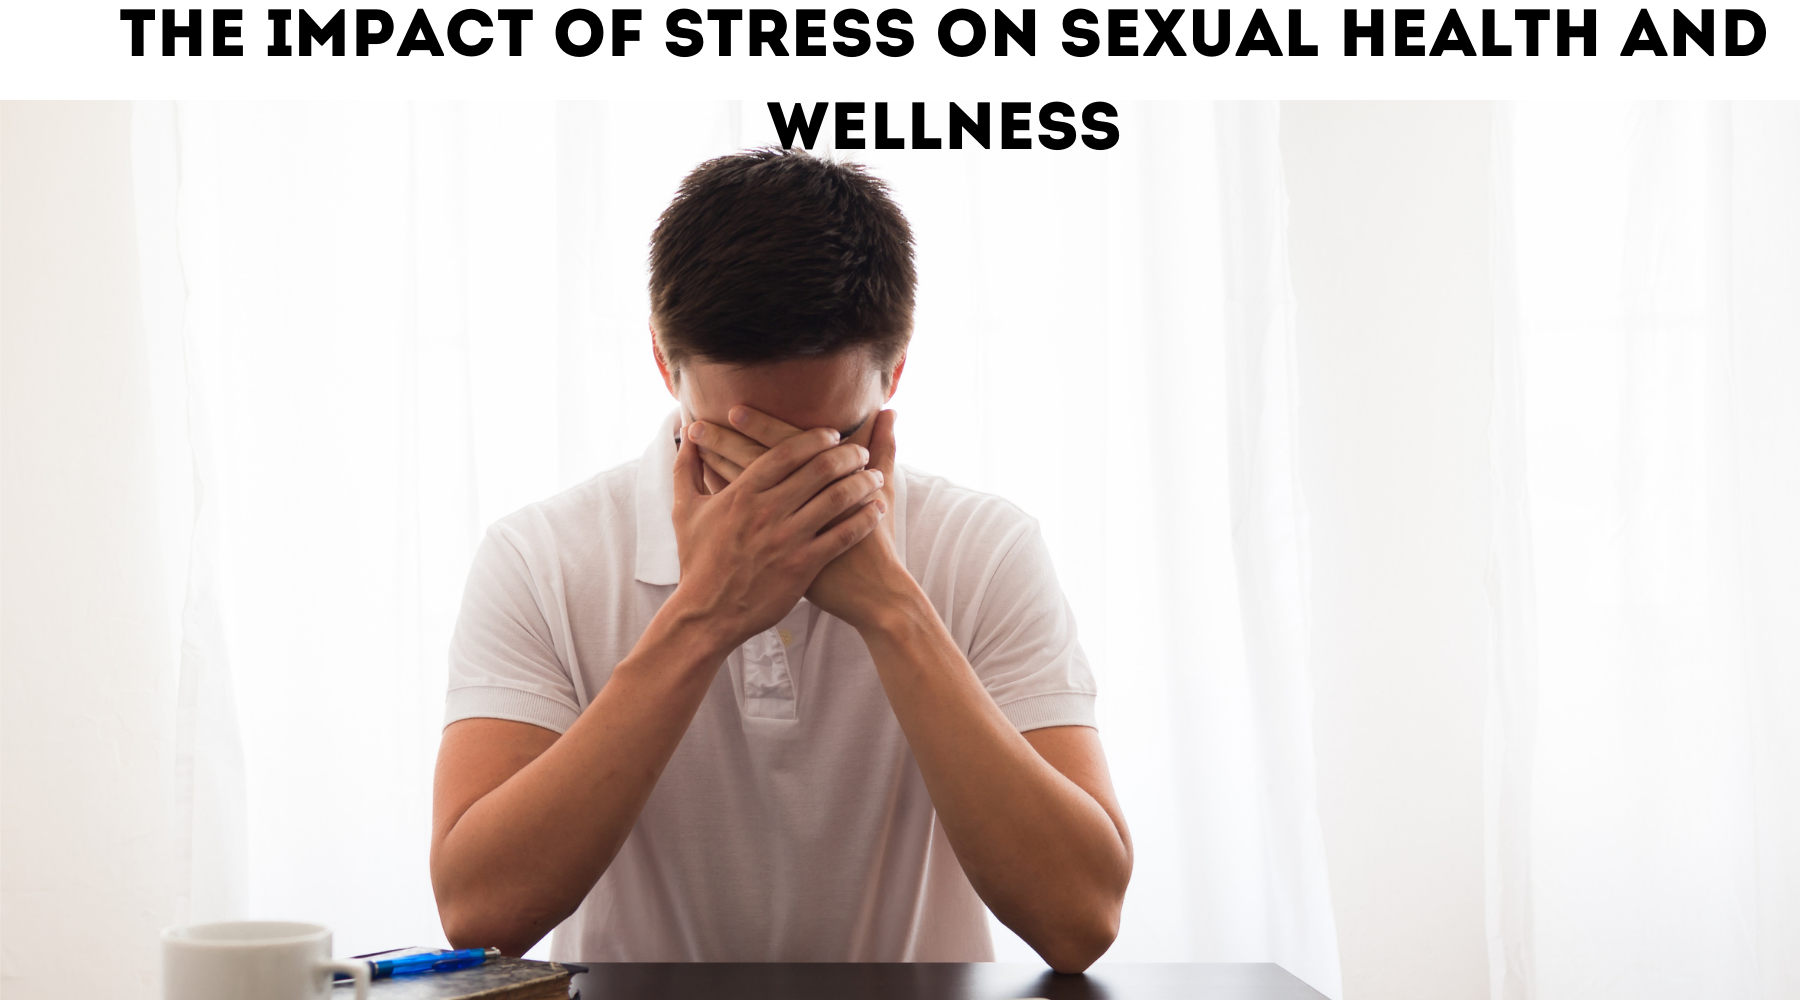 THE IMPACT OF STRESS ON SEXUAL HEALTH AND WELLNESS